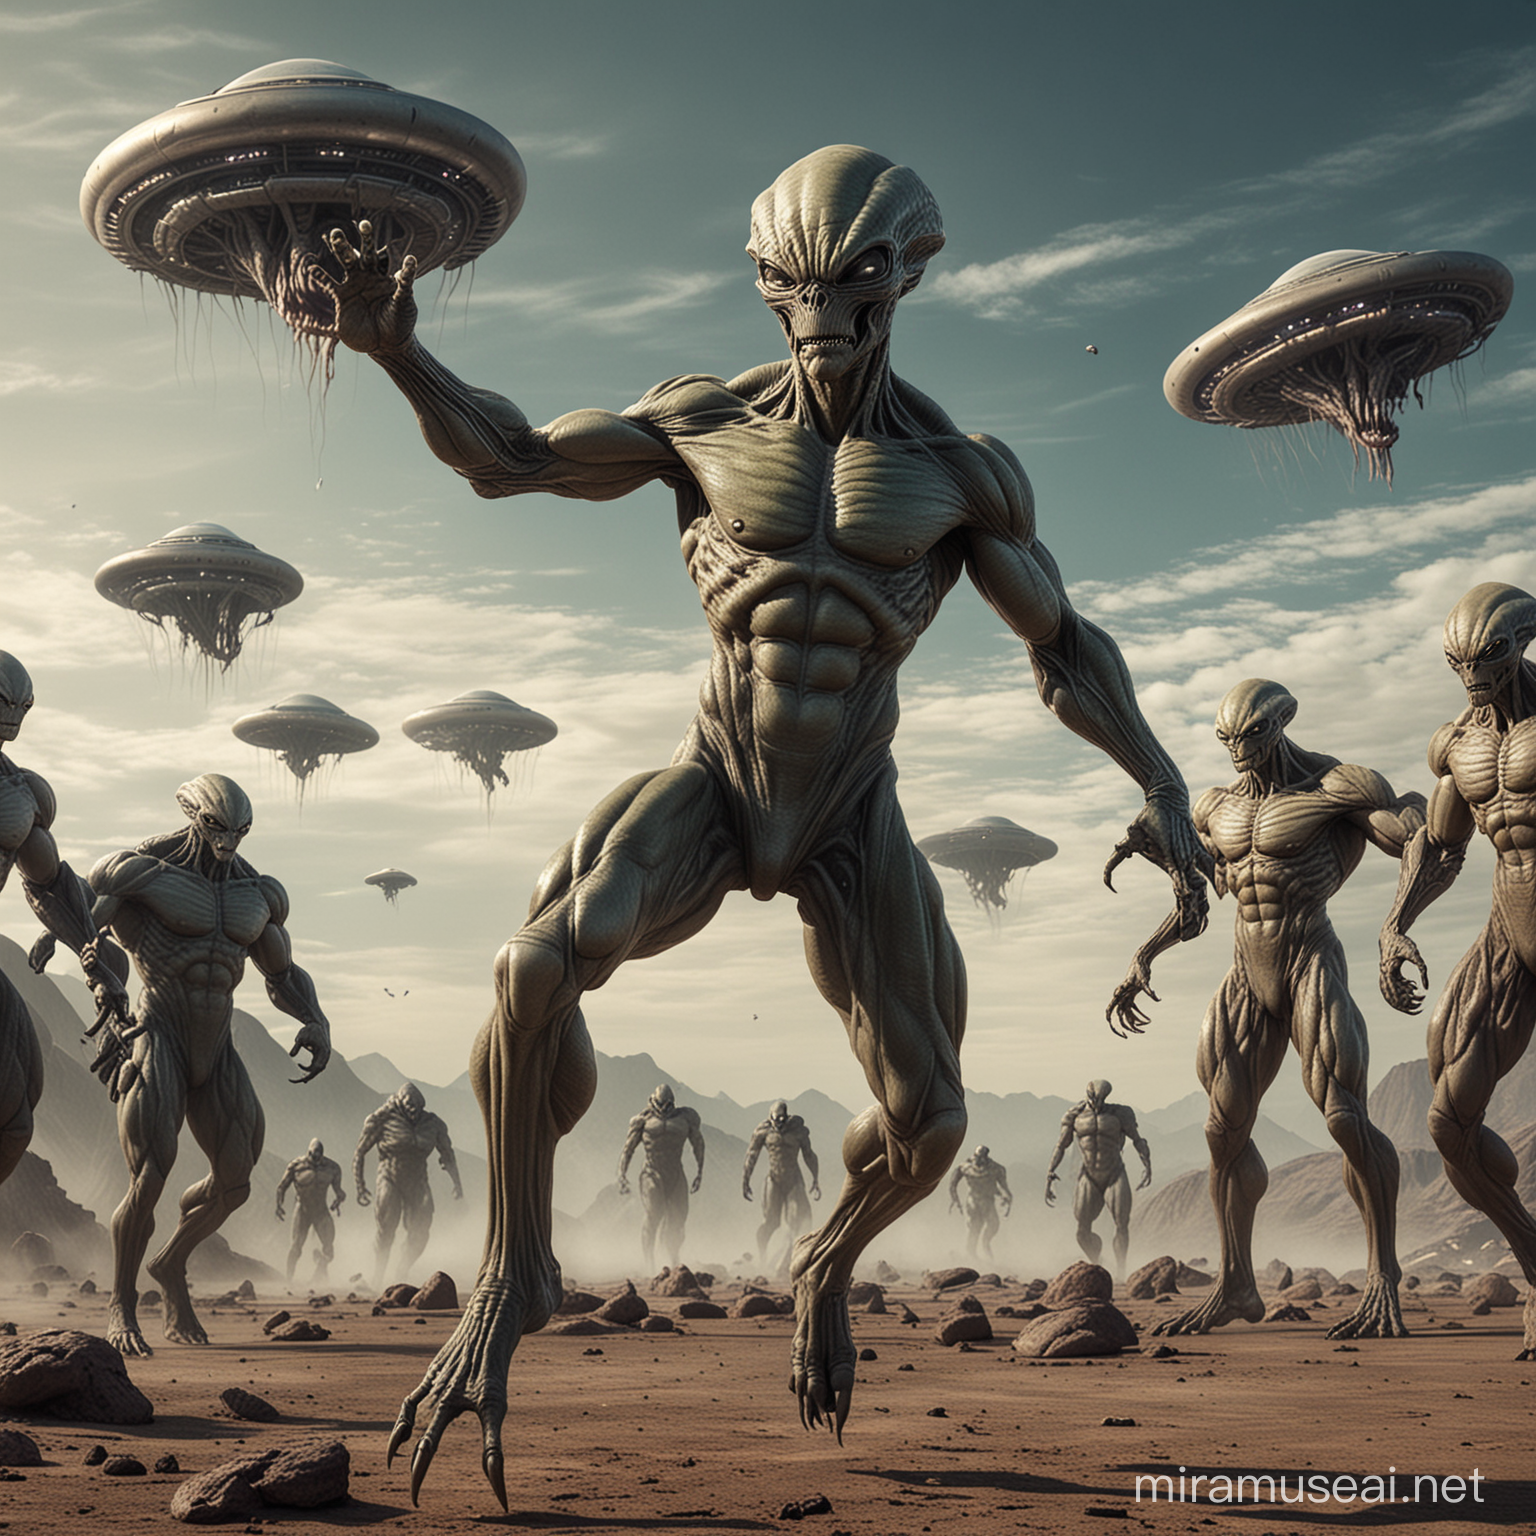 Alien Performing Intergalactic Calisthenics Amidst UFOs and Monsters